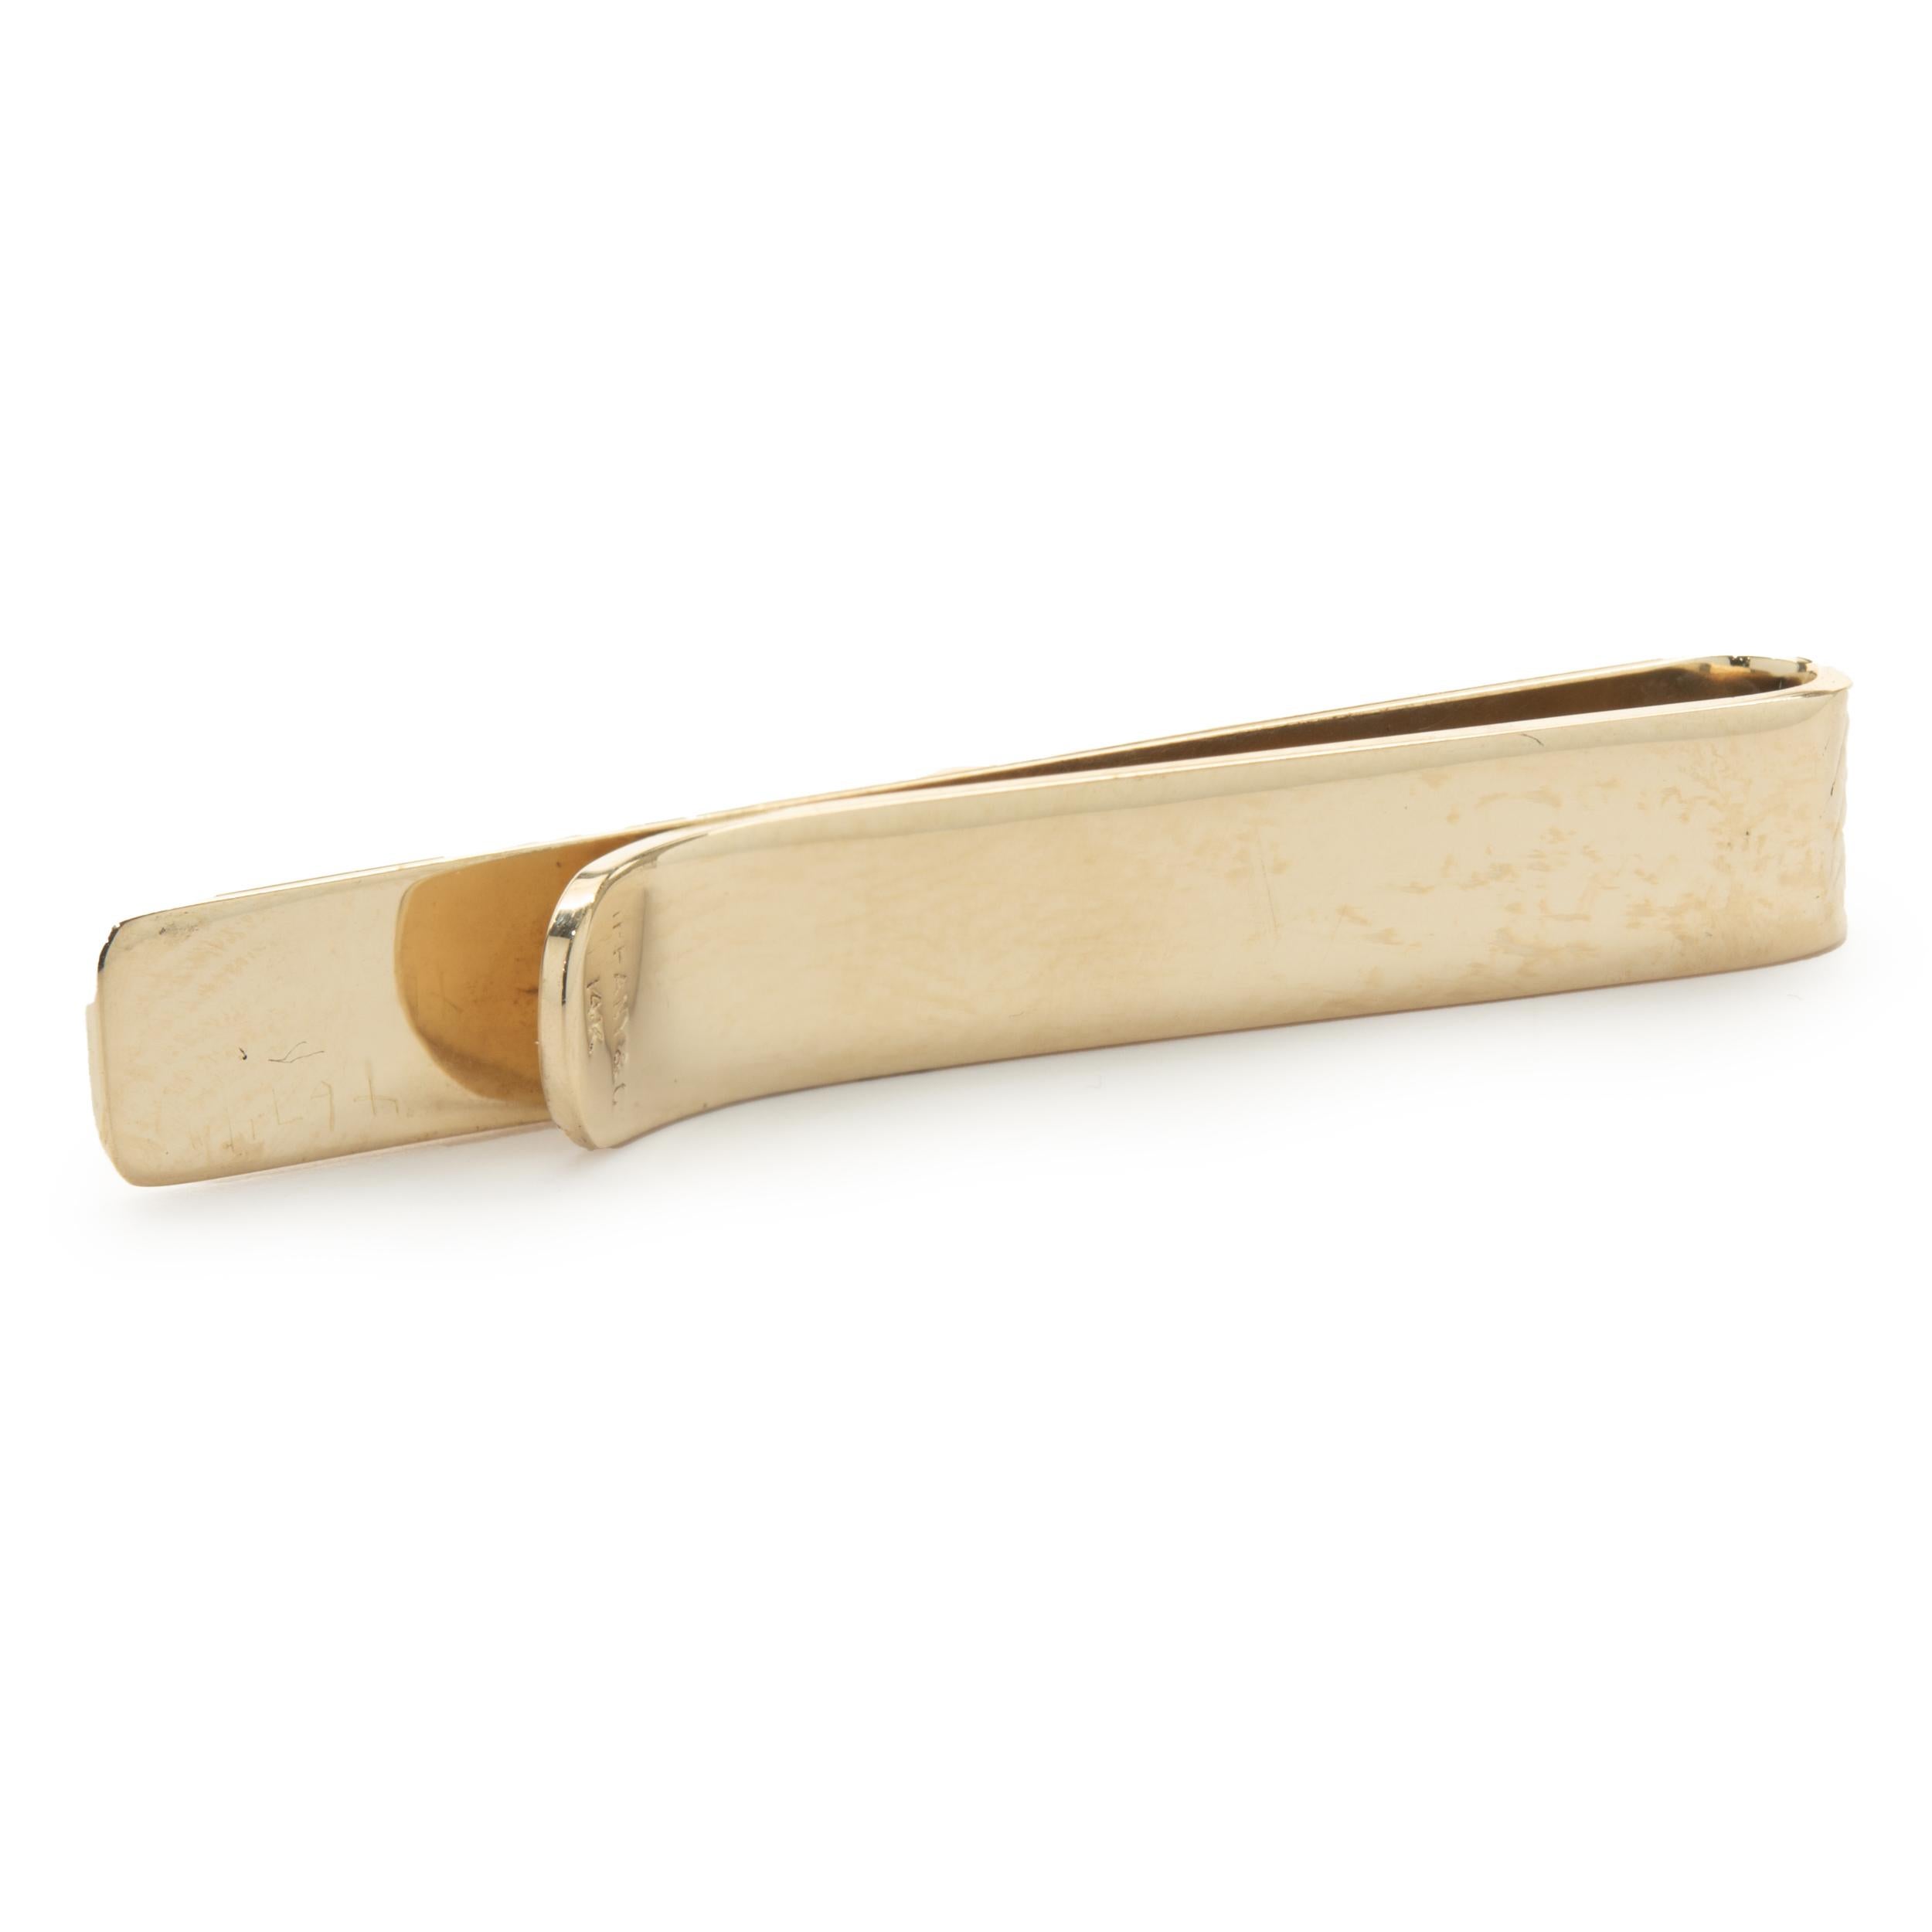 Designer: Tiffany & Co. 
Material: 14K yellow gold
Dimensions: tie bar measures 42.50 x 6.20mm
Weight: 5.99 grams
